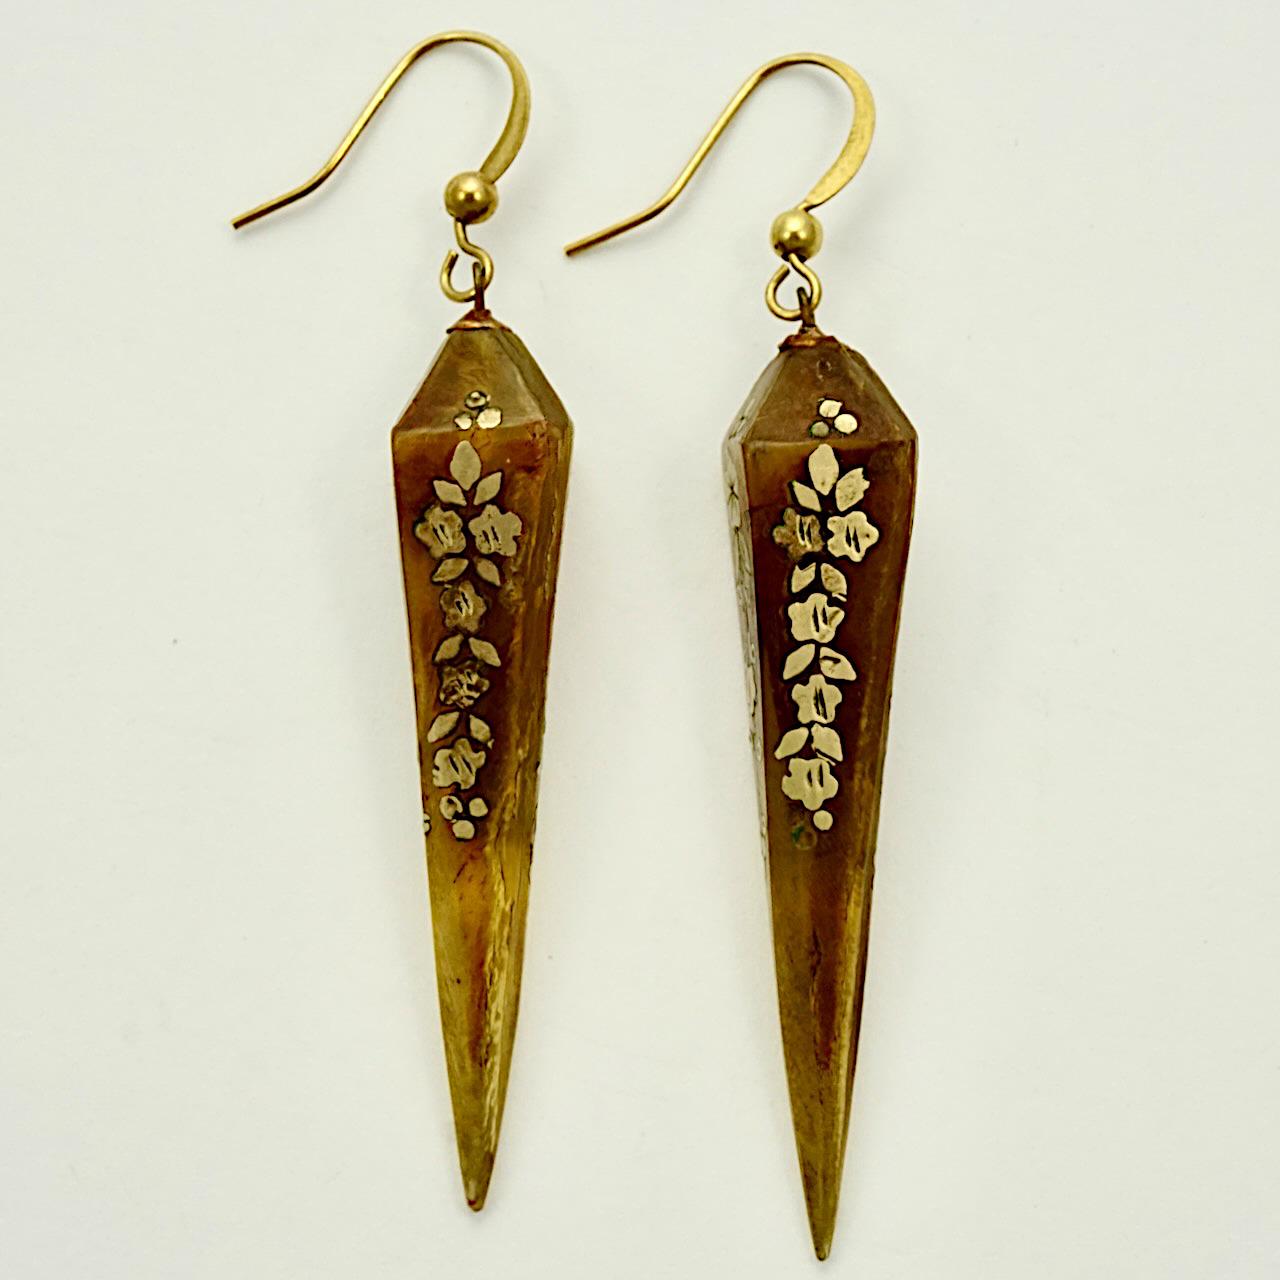 Lovely antique torpedo drop earrings, with a gold tone (possibly gold) inlaid flower and scroll design. We have added the new brass hooks. Measuring, not including the hooks, length 5 cm / 1.9 inches. A very few pieces of inlay are missing, one